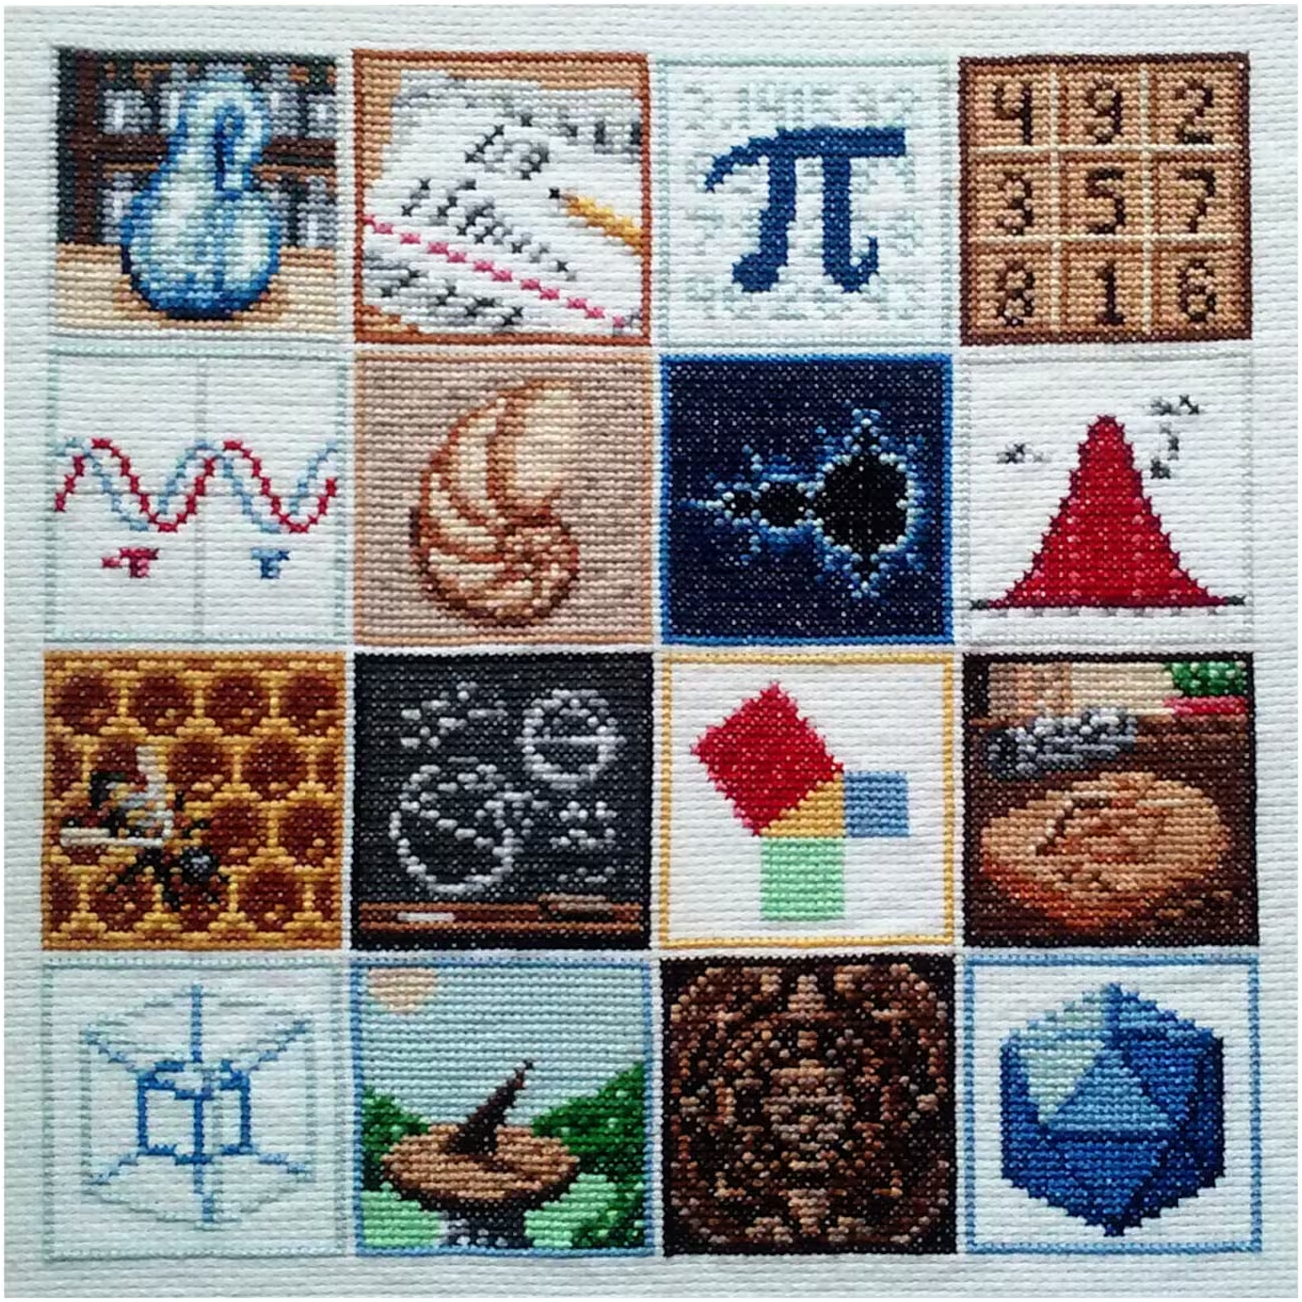 Photo of mathematical cross-stitch made up of 16 individual tiles each with a different mathematical design, including Klein bottle, pi, sine curves, Mandelbrot, a normal curve, Pythagoras' theorem, a hypercube and an icosahedron